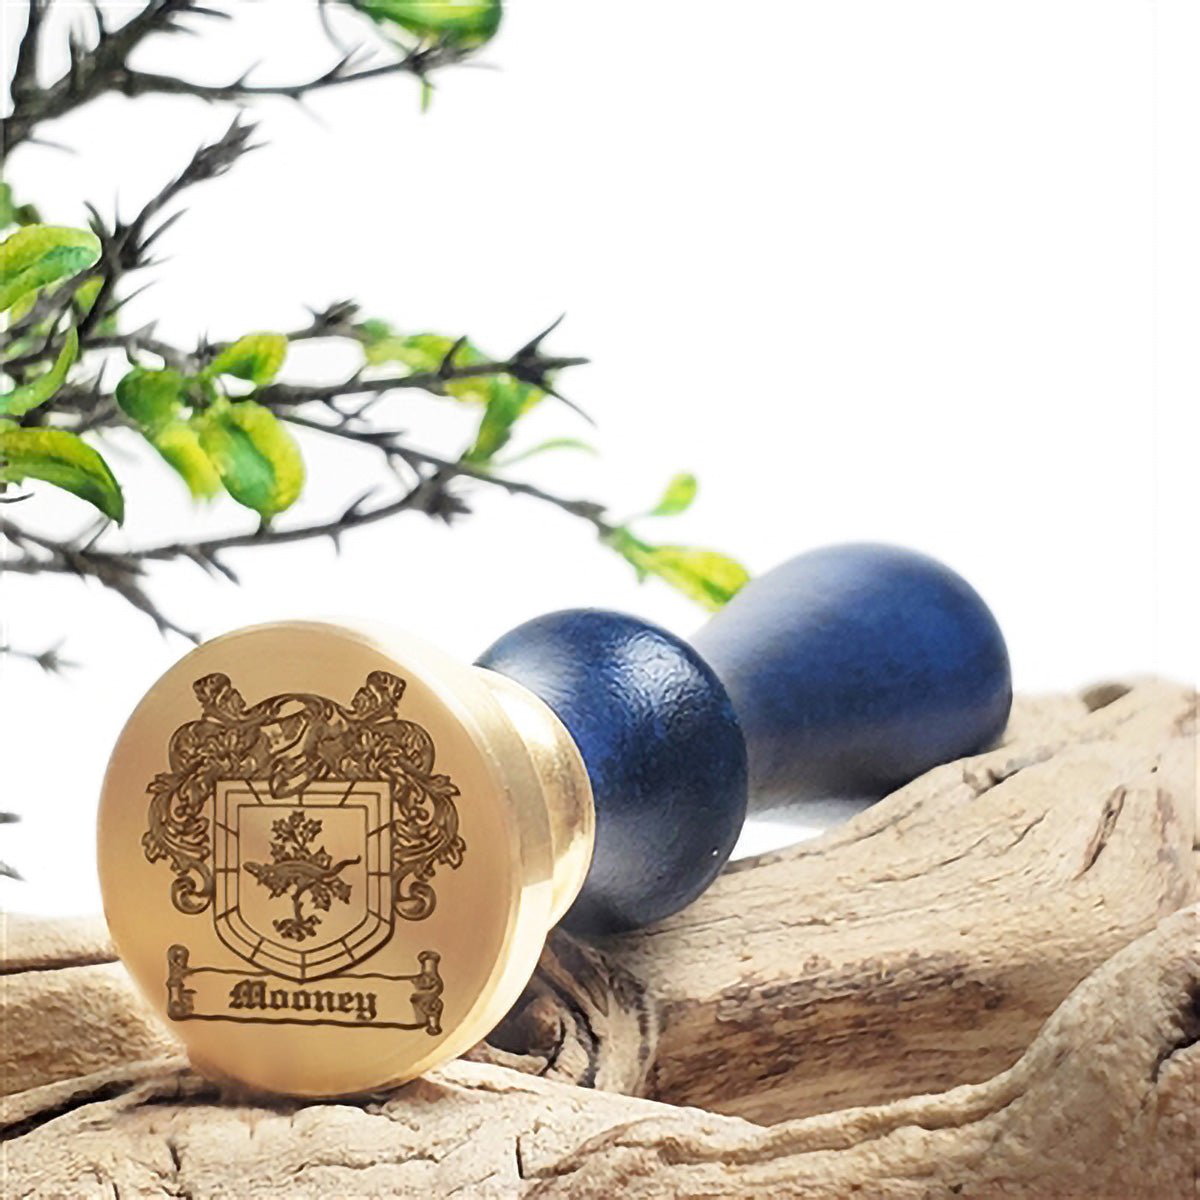 Ready Made Wax Seal Stamp - Ivy League Universities' Coats of Arms Wax Seal Stamp